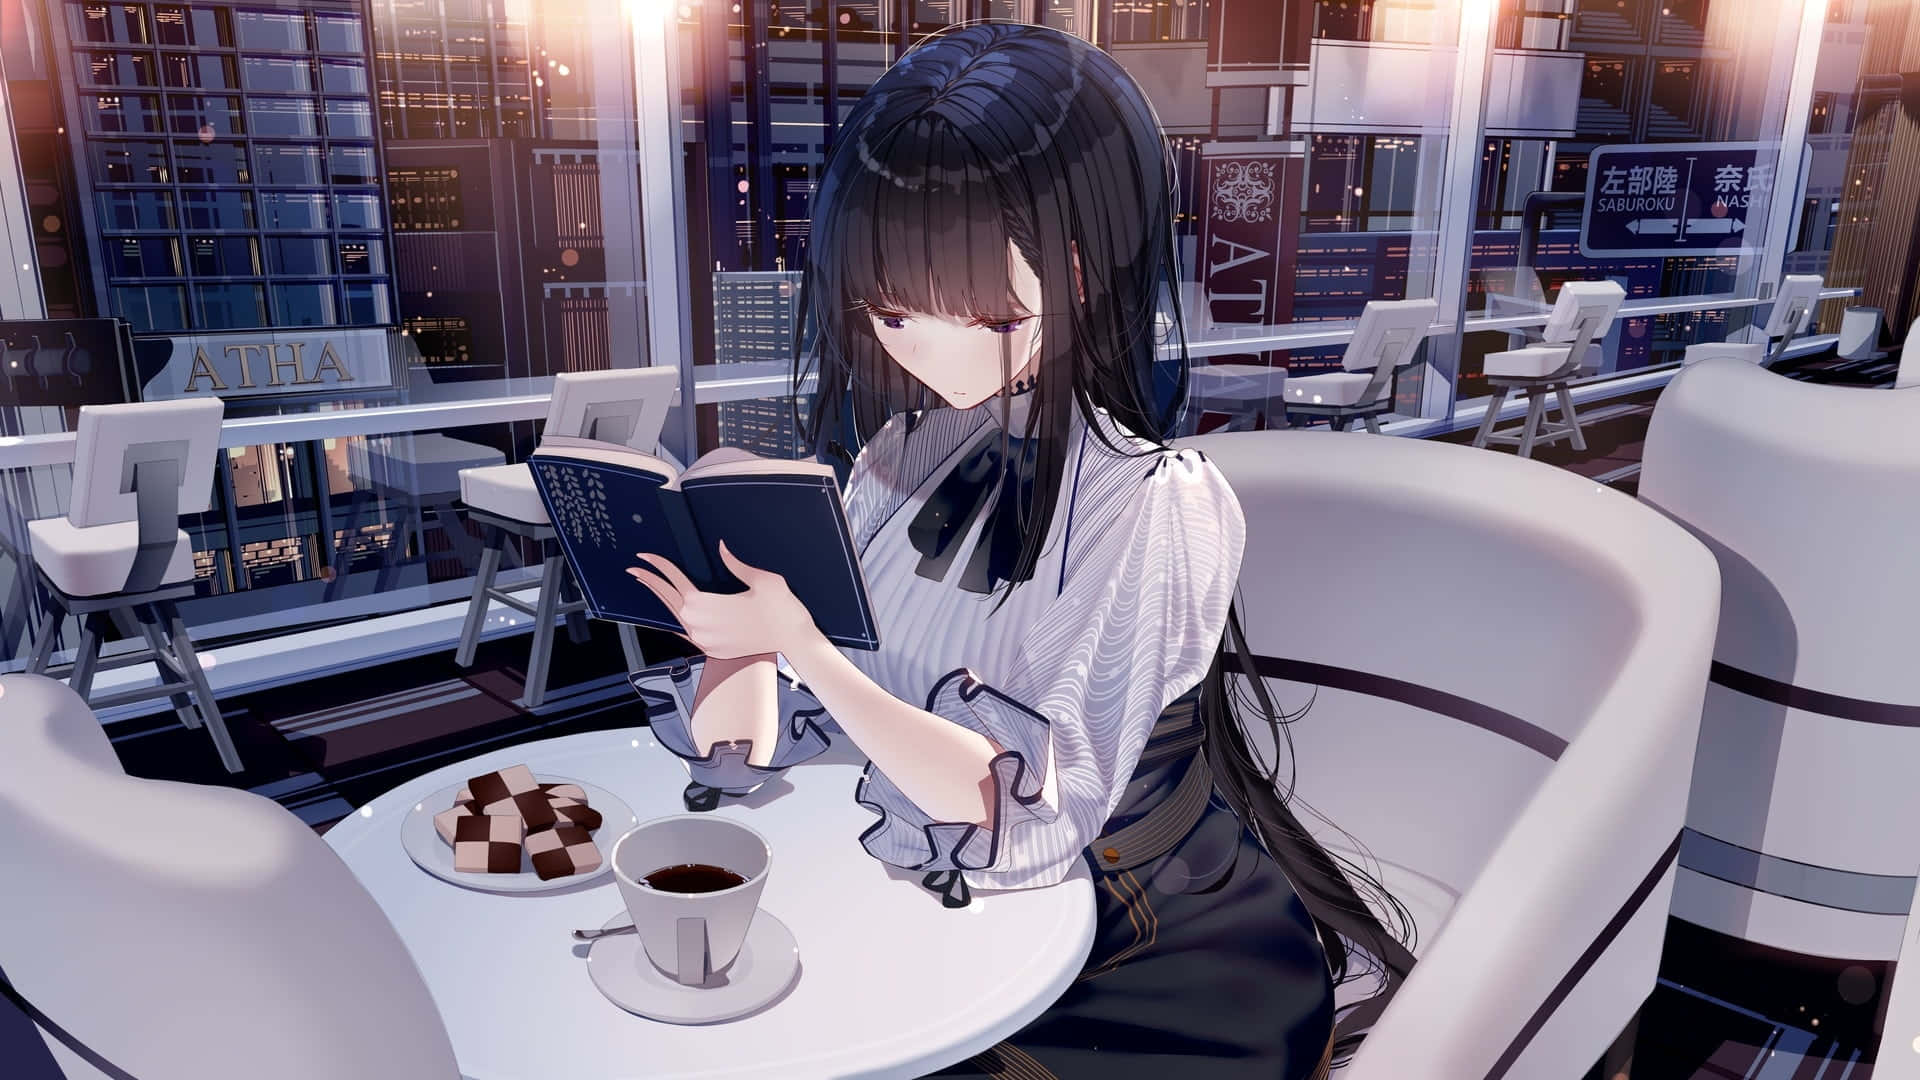 HD wallpaper anime girl sitting alone by the table inside cafe digital  wallpaper  Wallpaper Flare